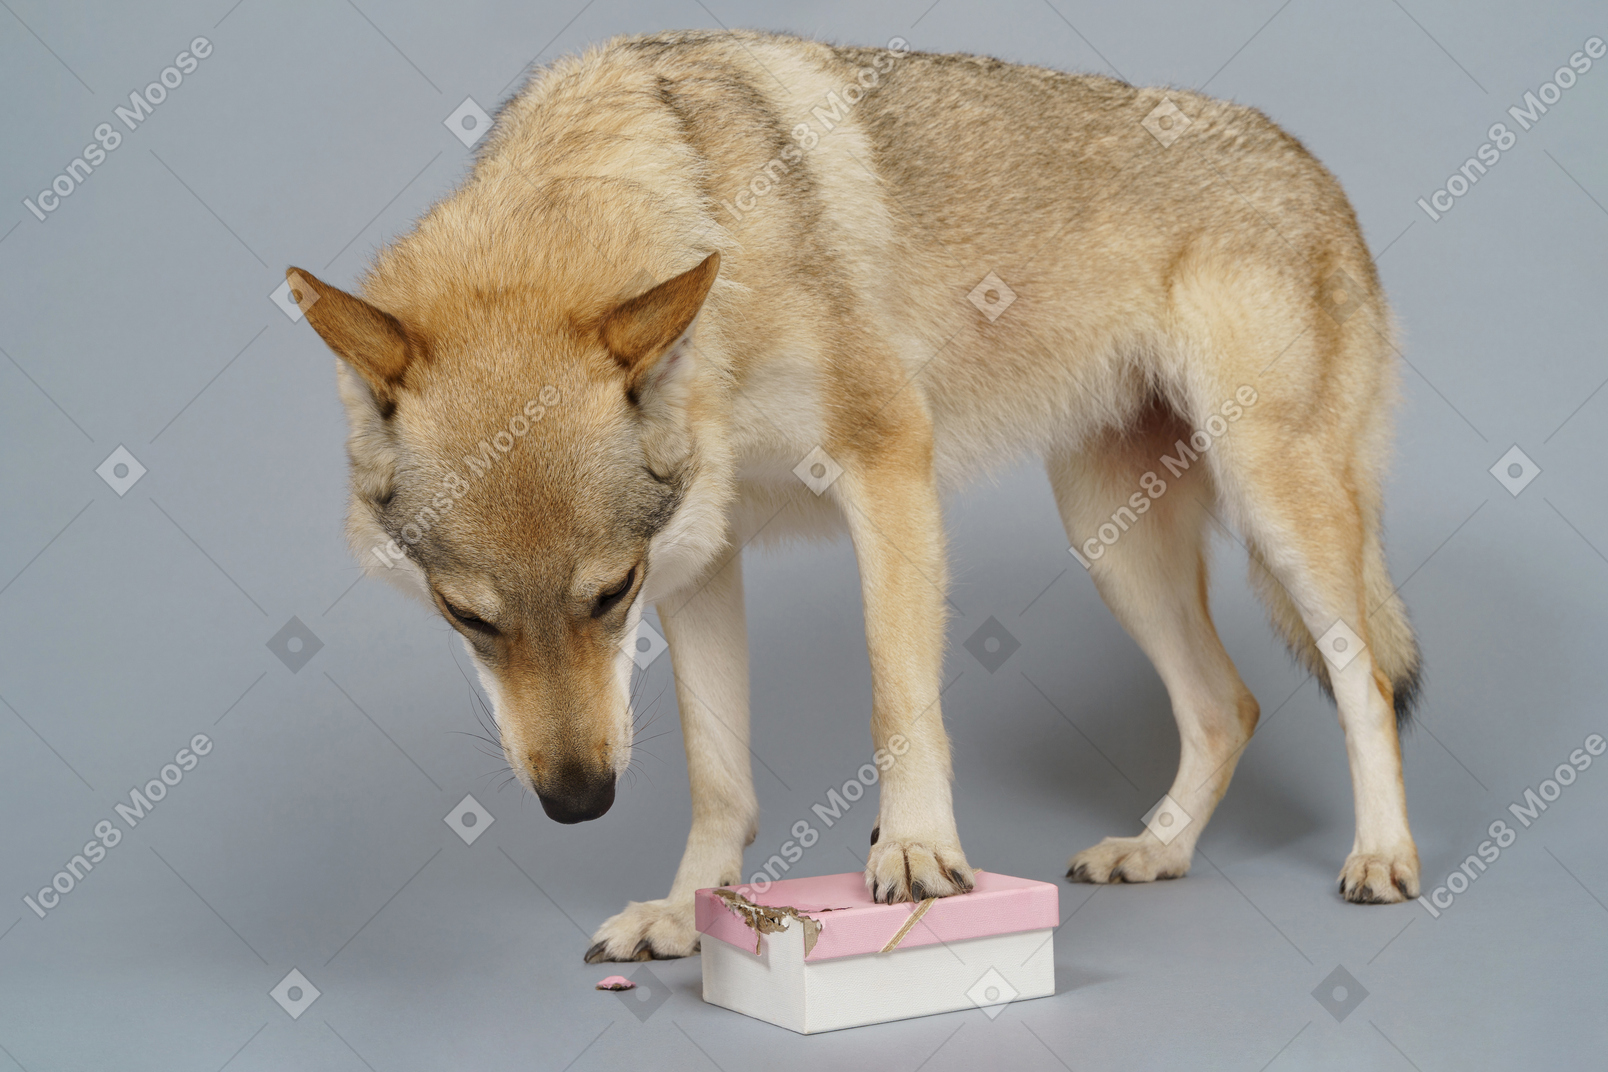 Full-length of a wolf-like dog searching for something in a box